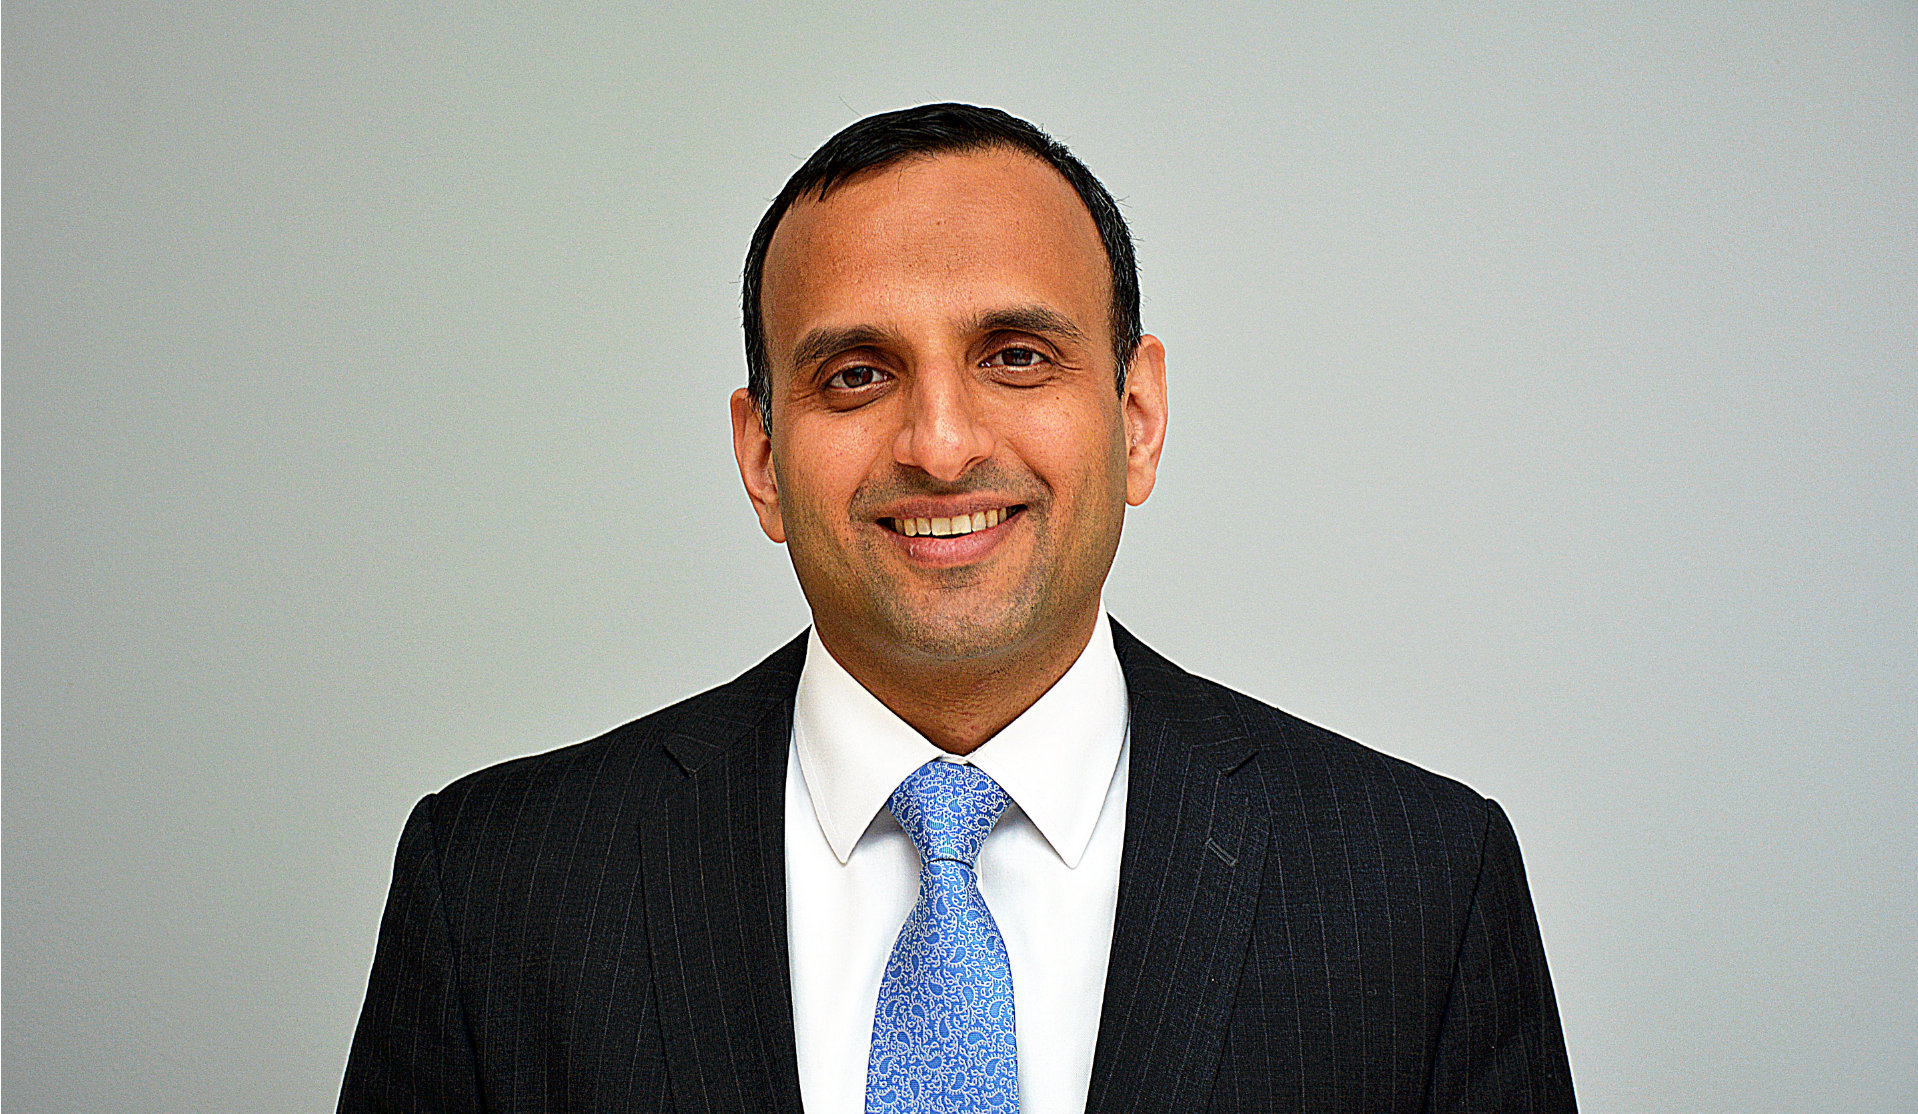 Vyntelligence appoints Gaurav Baveja as Chief Financial Officer to drive global growth